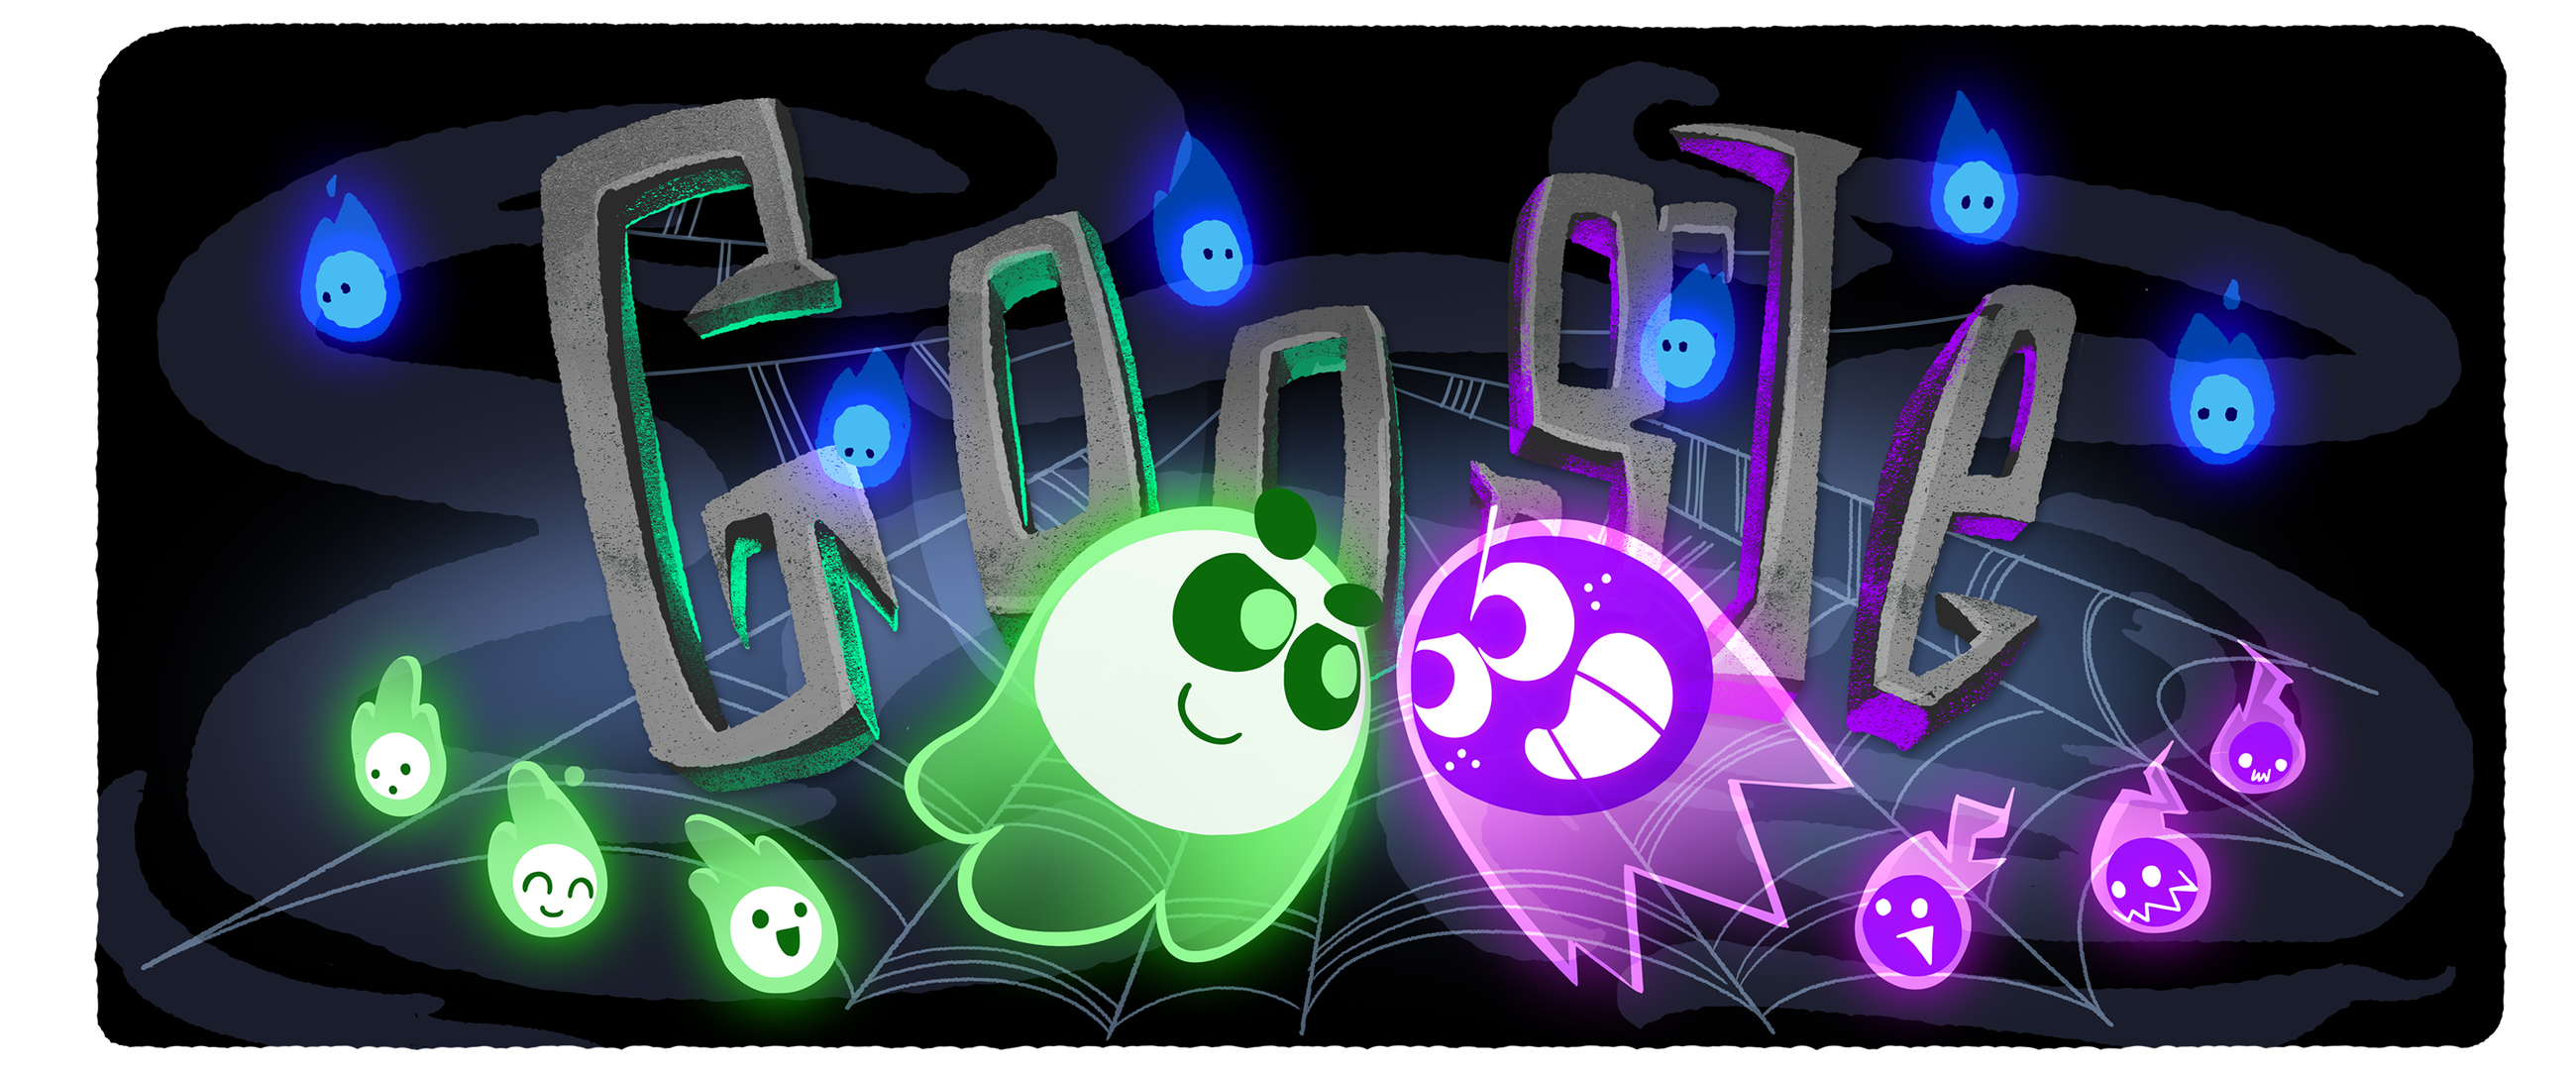 Google Doodle Halloween Game - Spooky Fun from Years